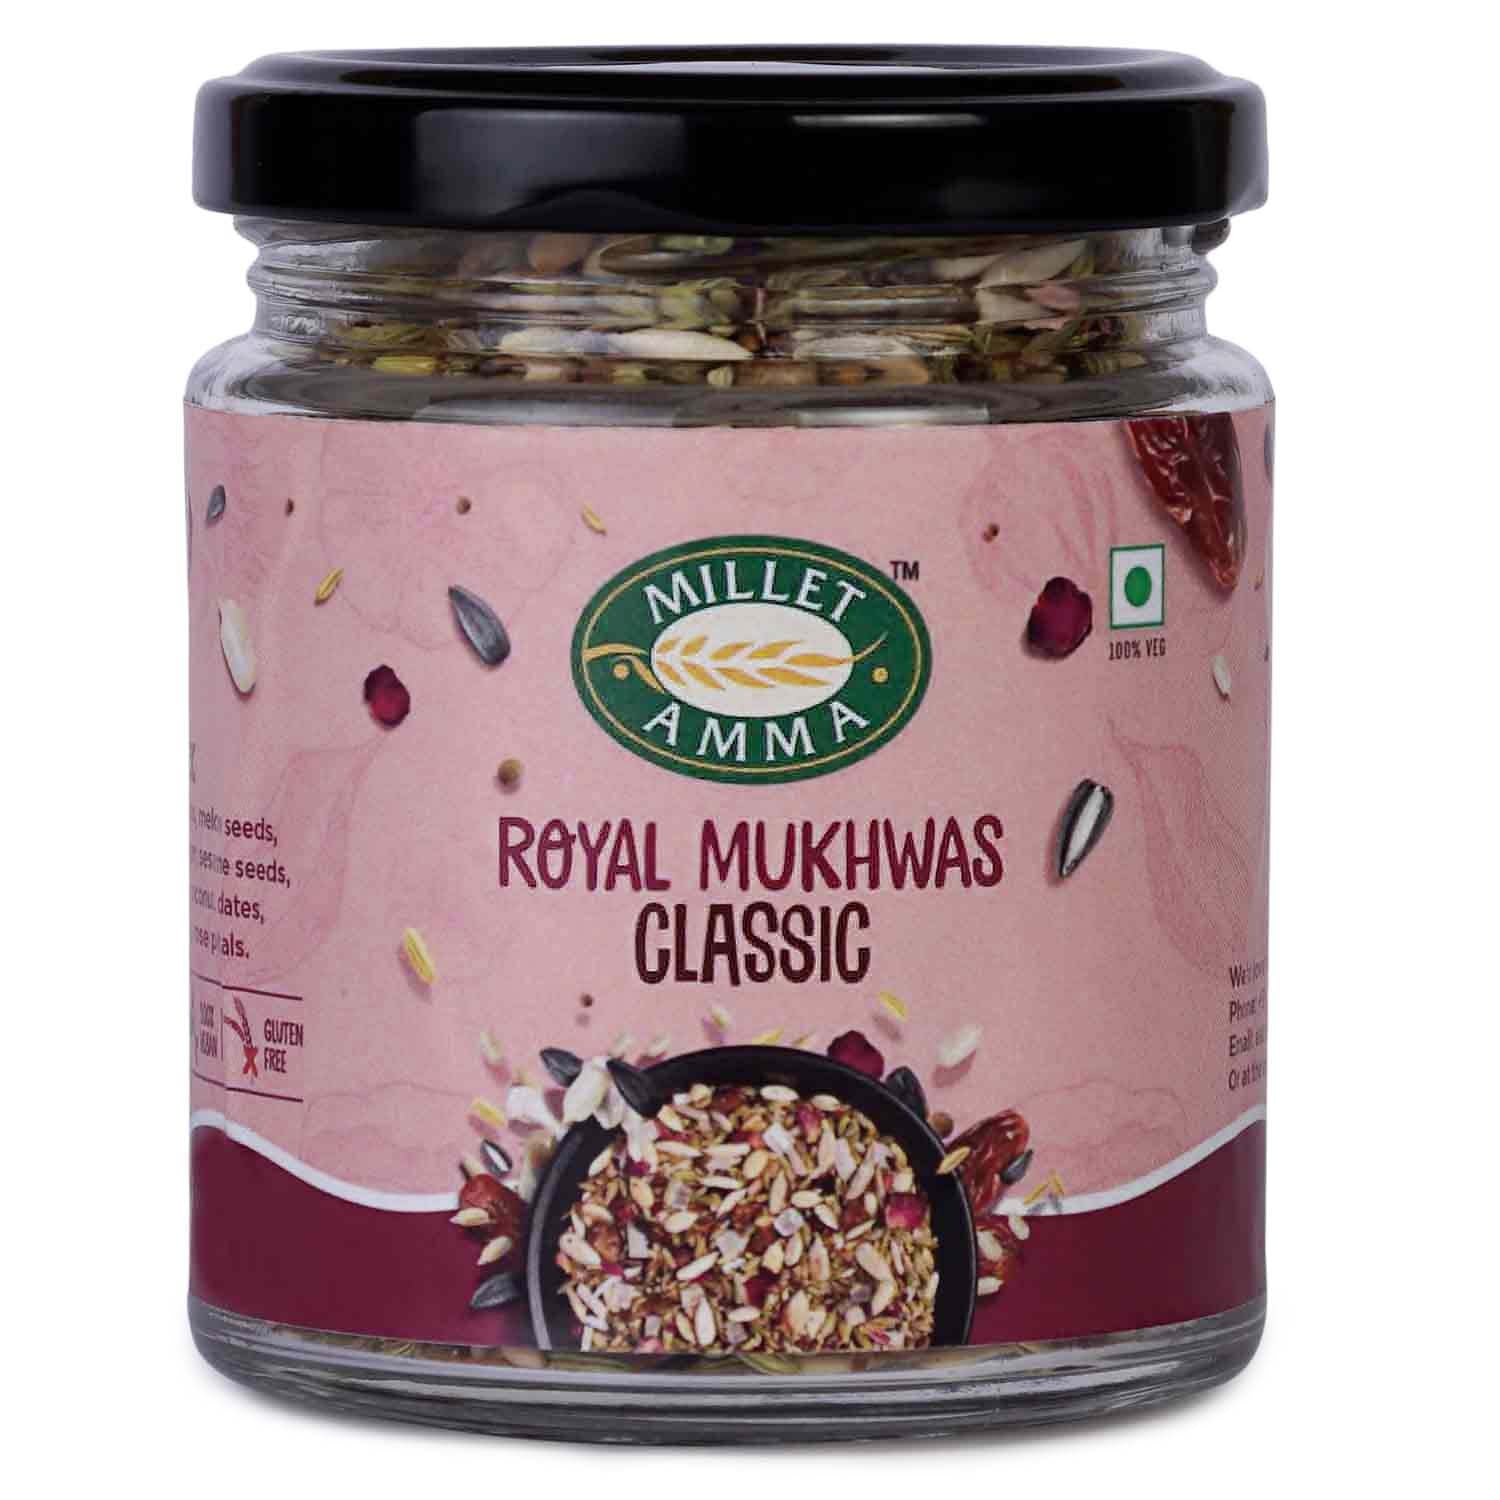 This nutritious Royal Mukhwas Classic is an after meal mouth freshener that is a mixture of healthy seeds that helps improve digestion.  Made with Sunflower Seeds, Melon Seeds and Flaxseeds, it is loaded with Omega-3 Fatty acids which is a healthy fat essential for the body.